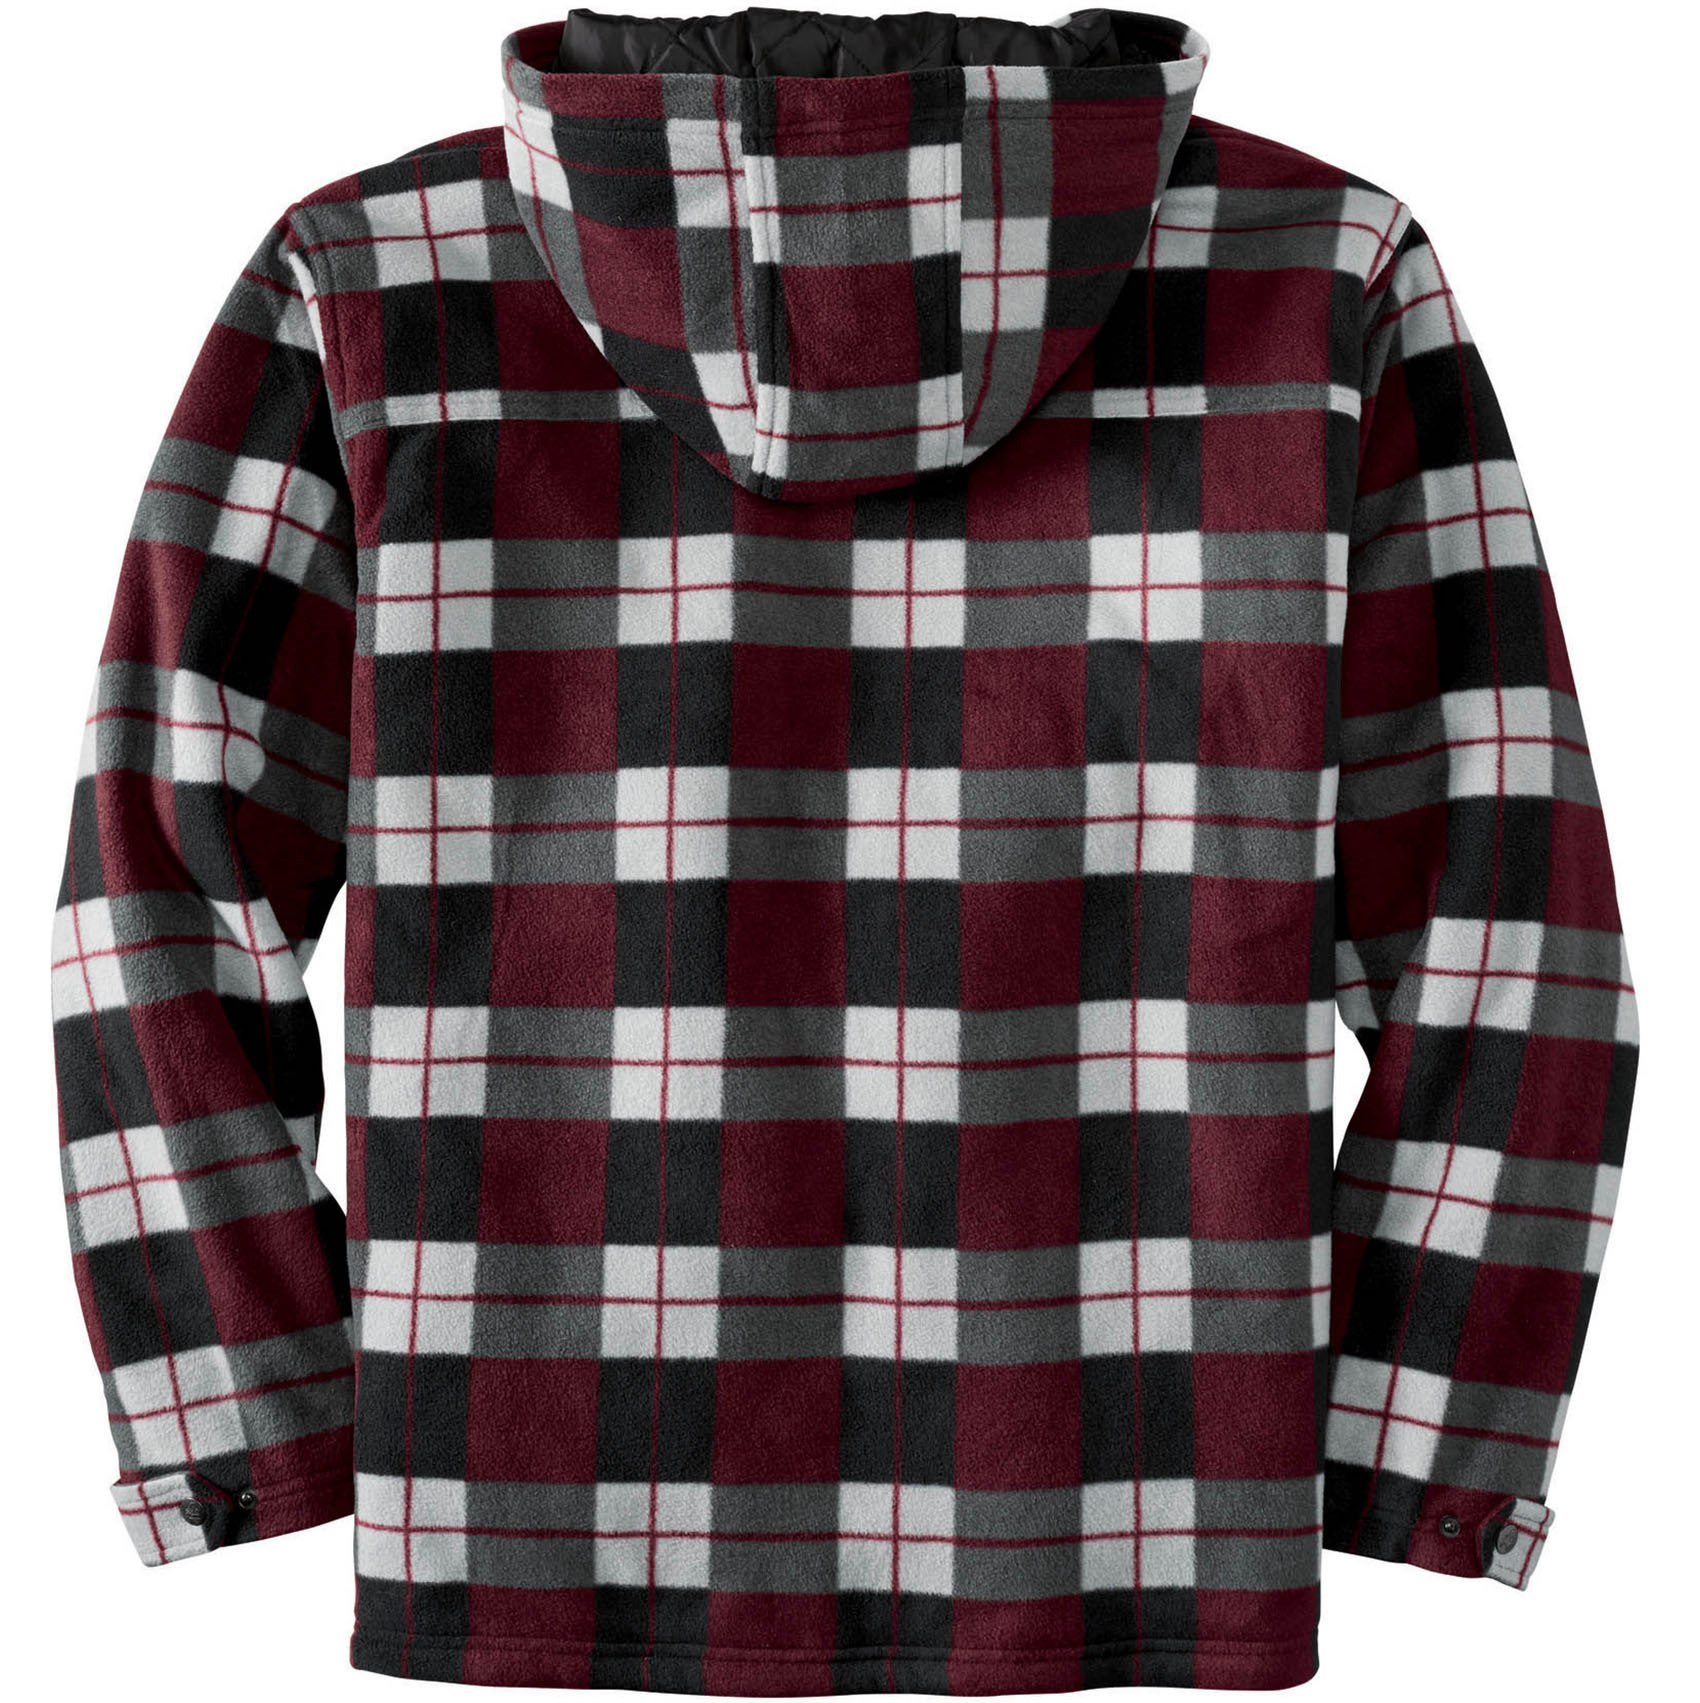 Men's Autumn & Winter Casual Check Hooded Jacket